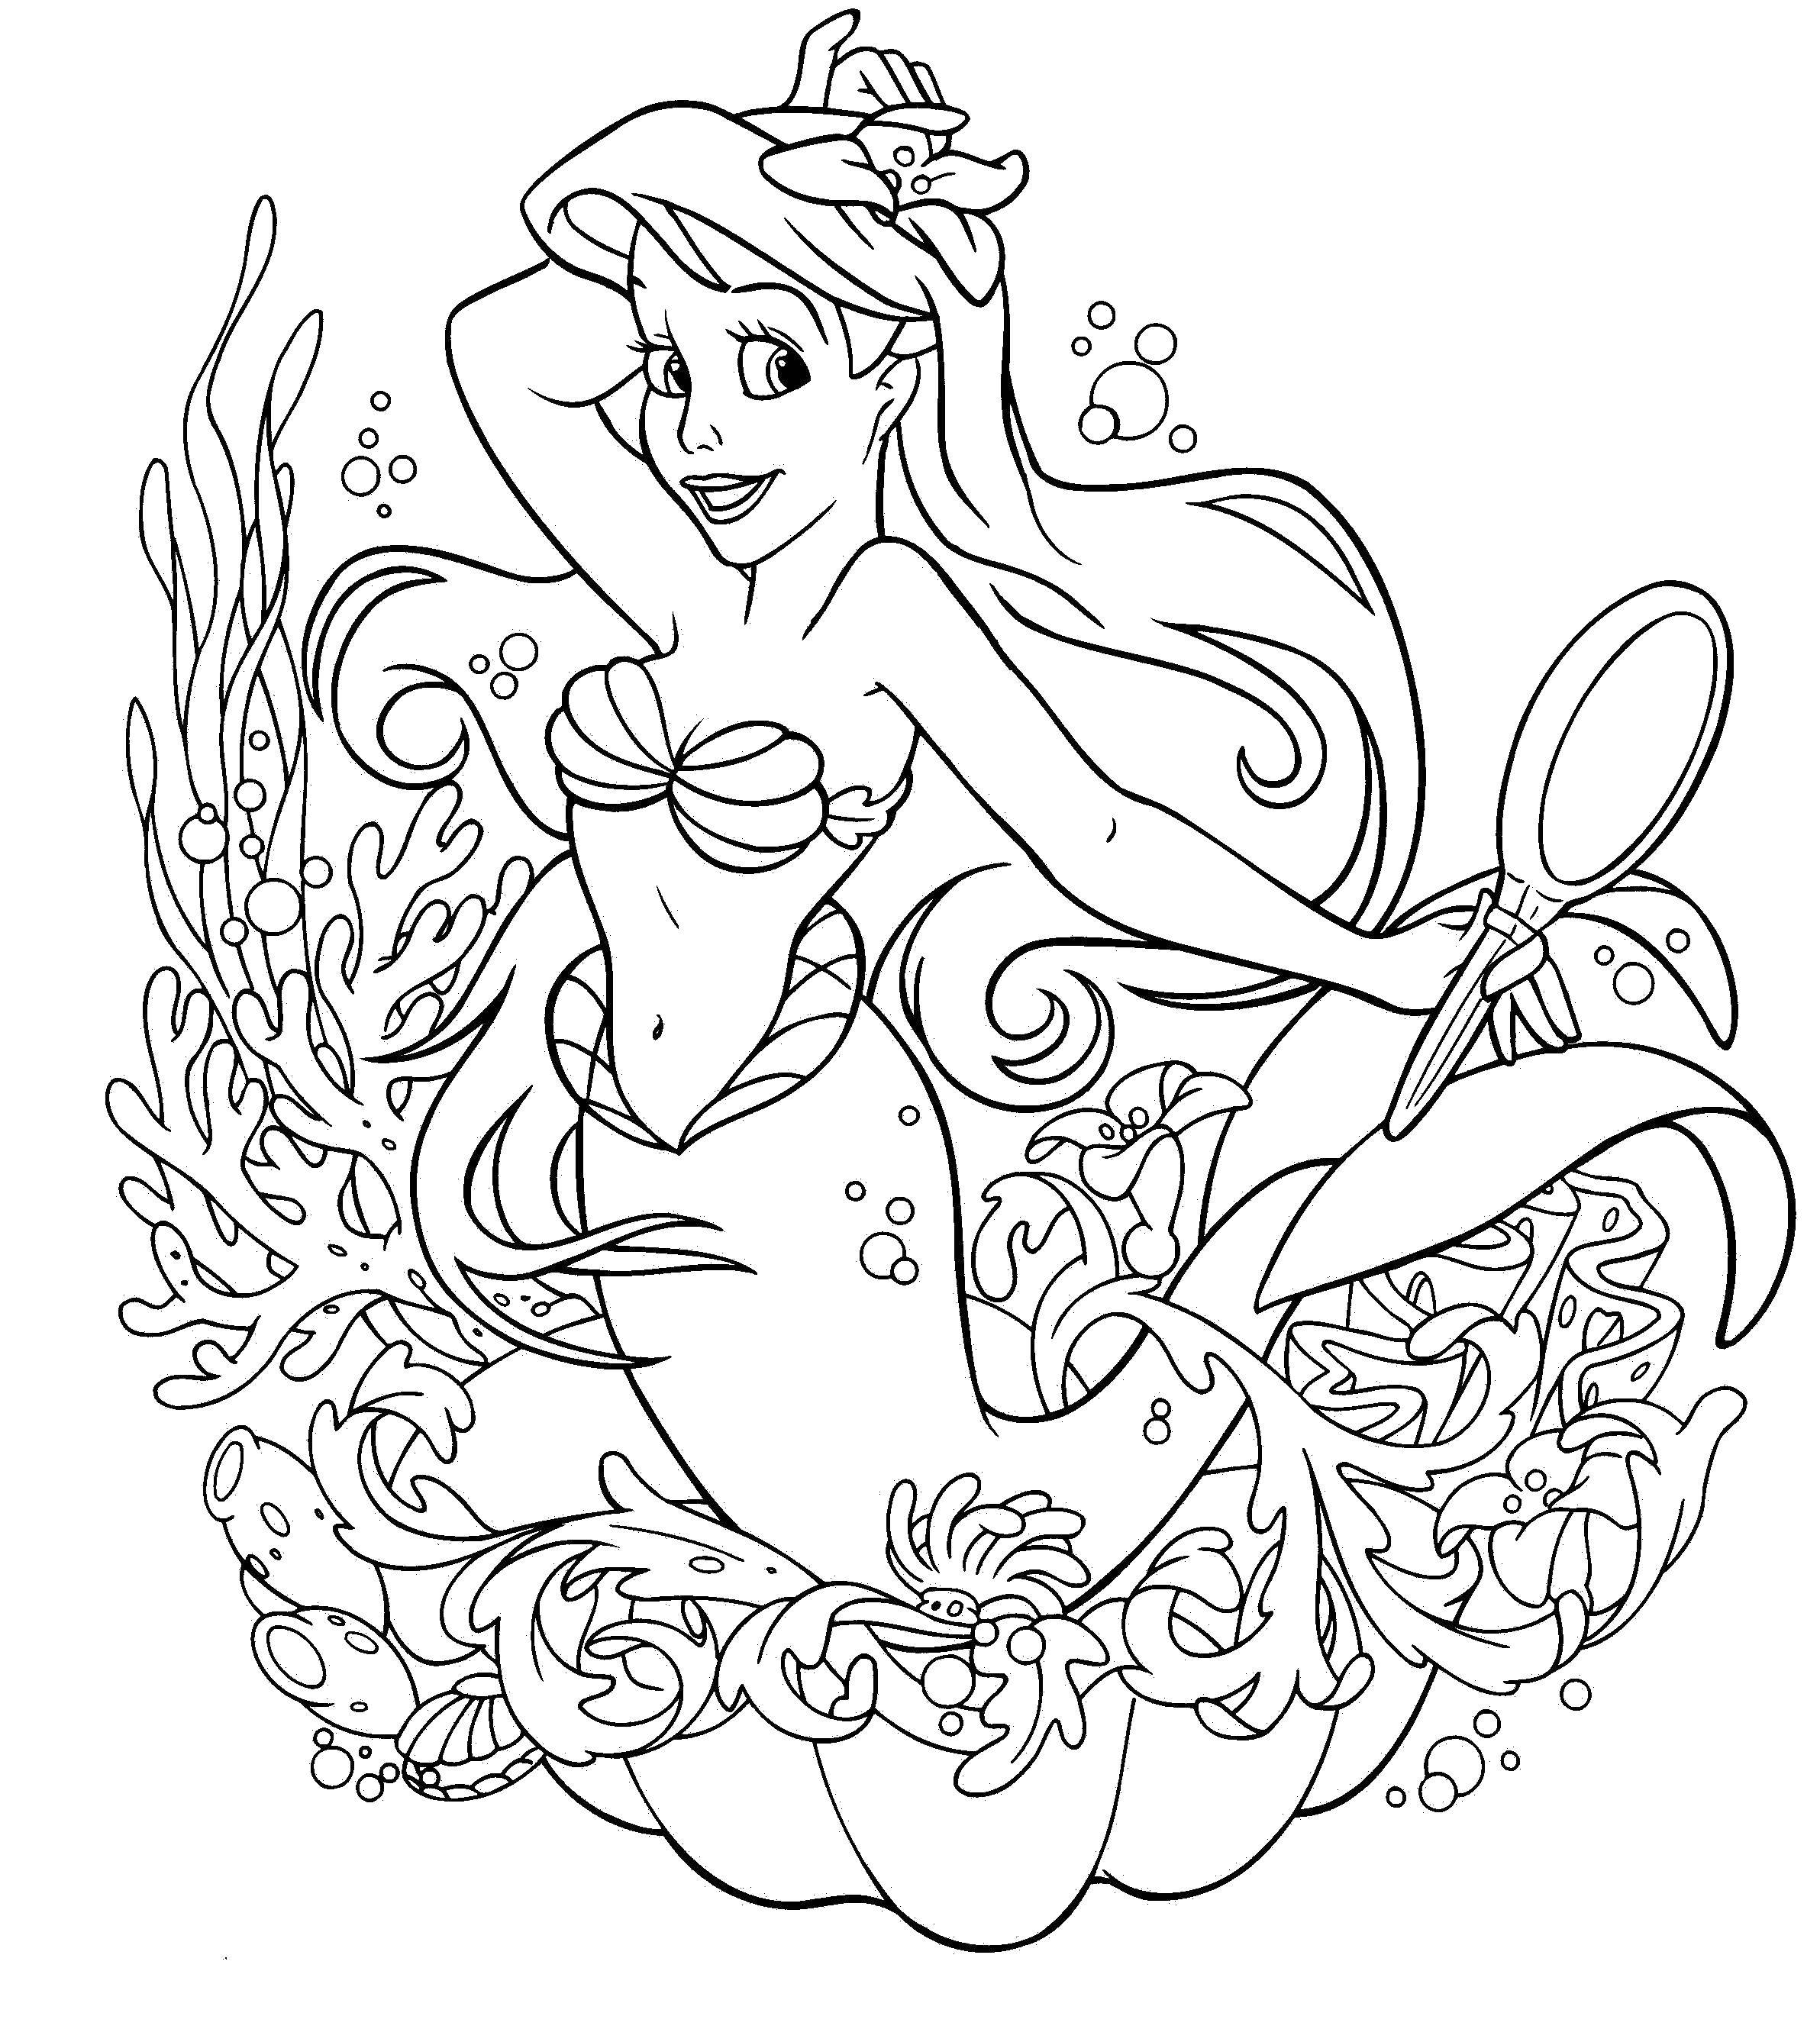 Coloring Ariel among the waves. Category Princess. Tags:  Princess, Ariel, the little mermaid.